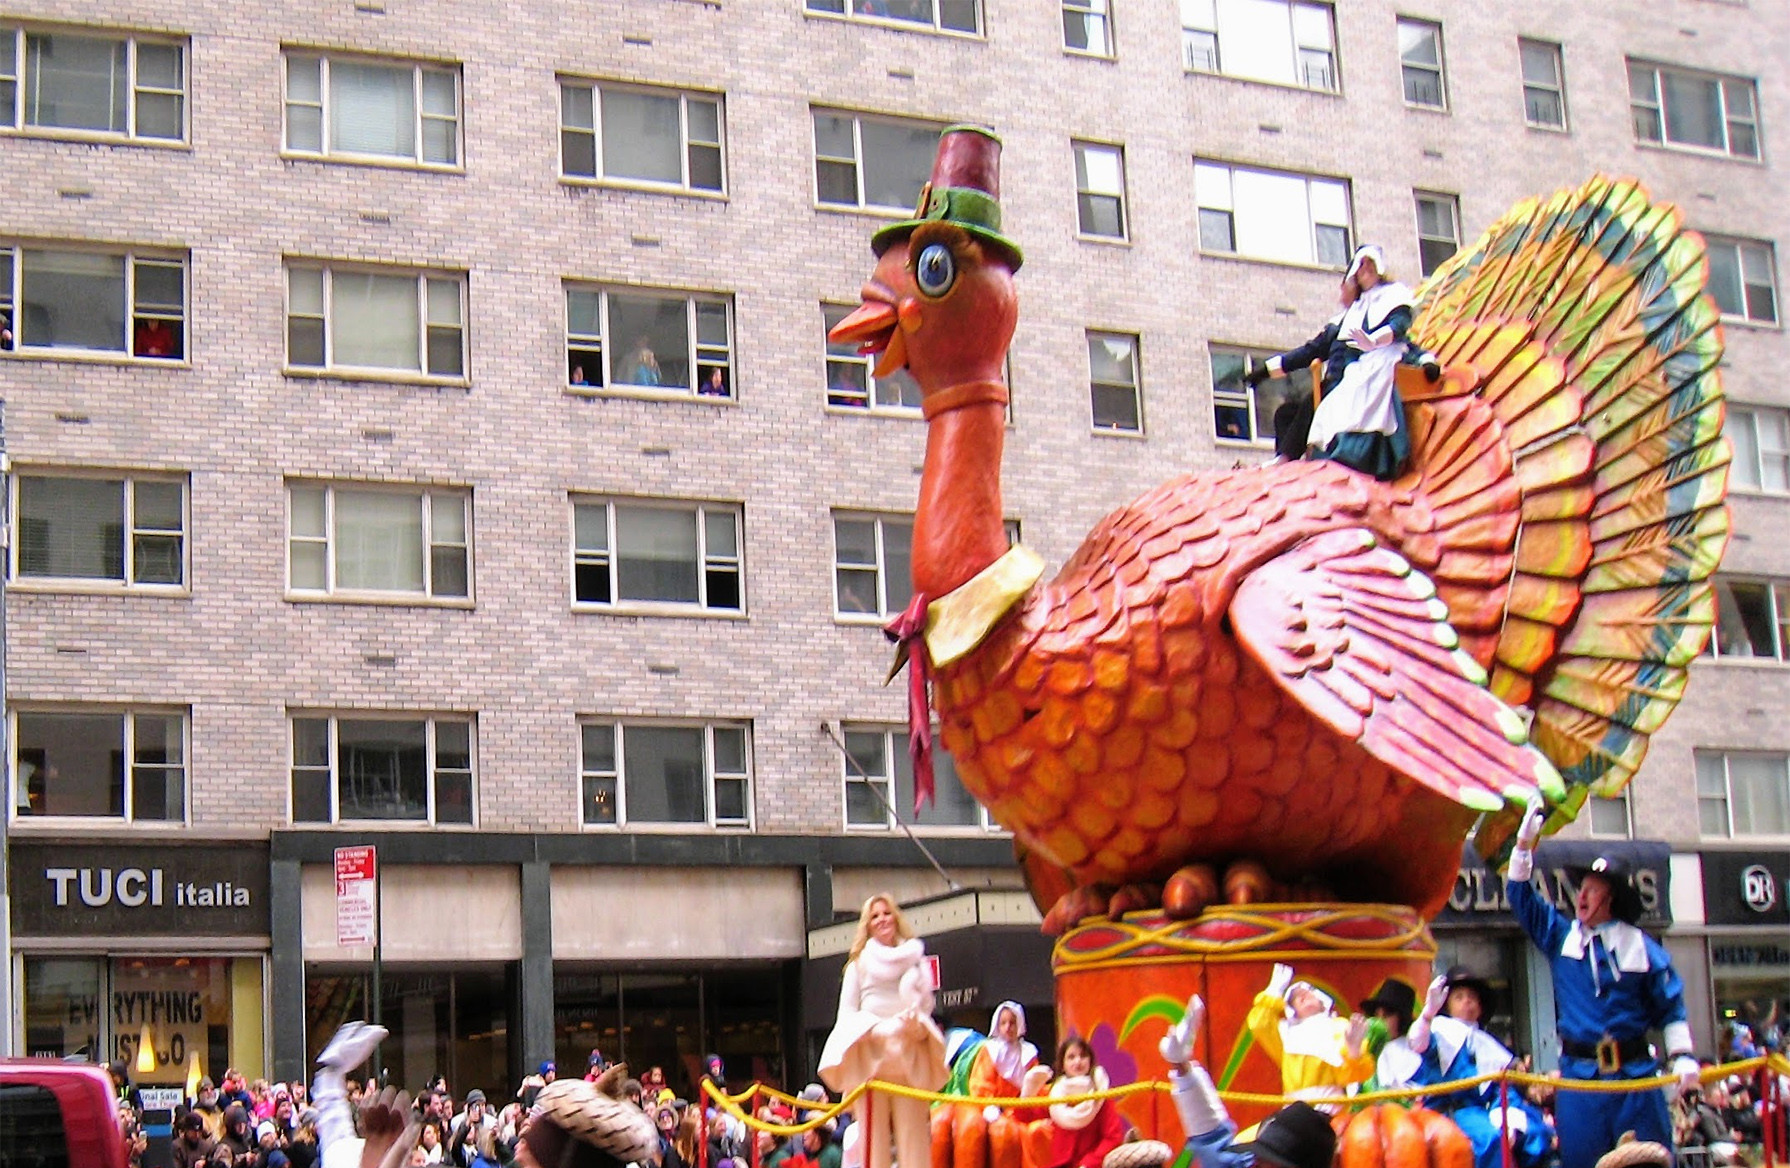 10 Thanksgiving traditions from around the country - The Morning Call